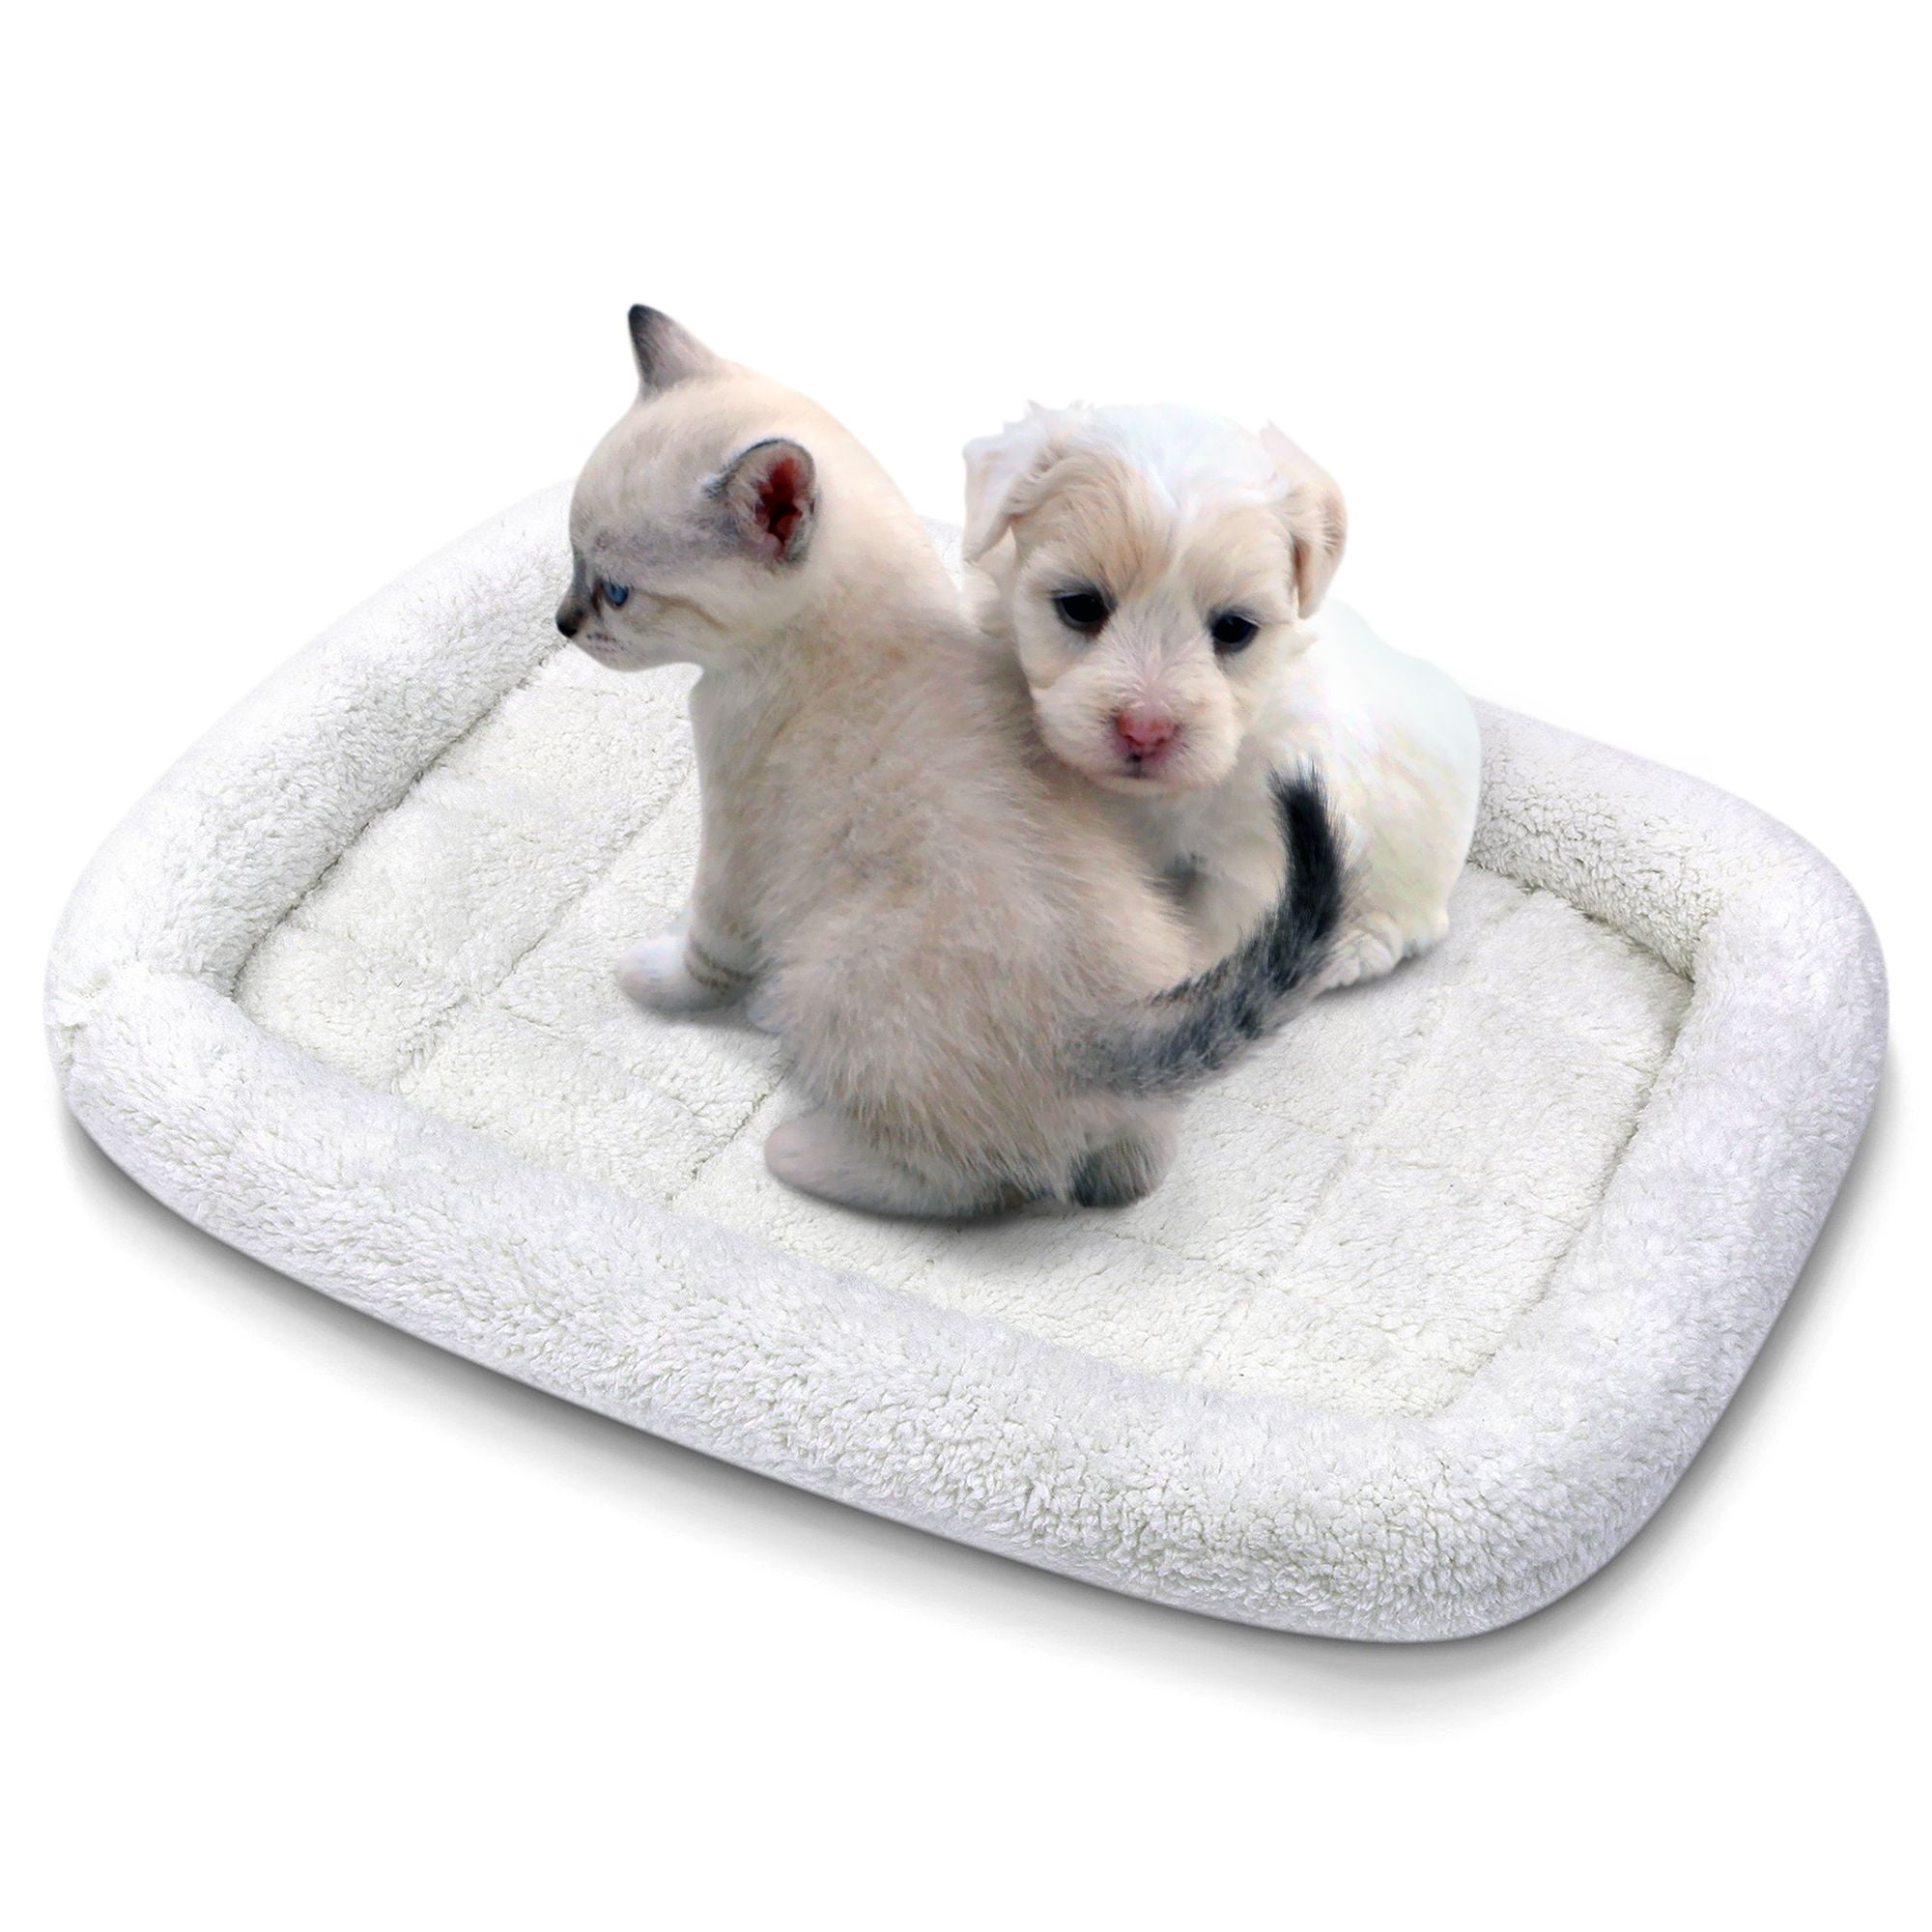 PETSGO Pet Crate Beds Supersoft Dog and Cat Beds for Crates Machine Wash Dryer Friendly Anti Slip Pet Beds for Pets Sleeping 